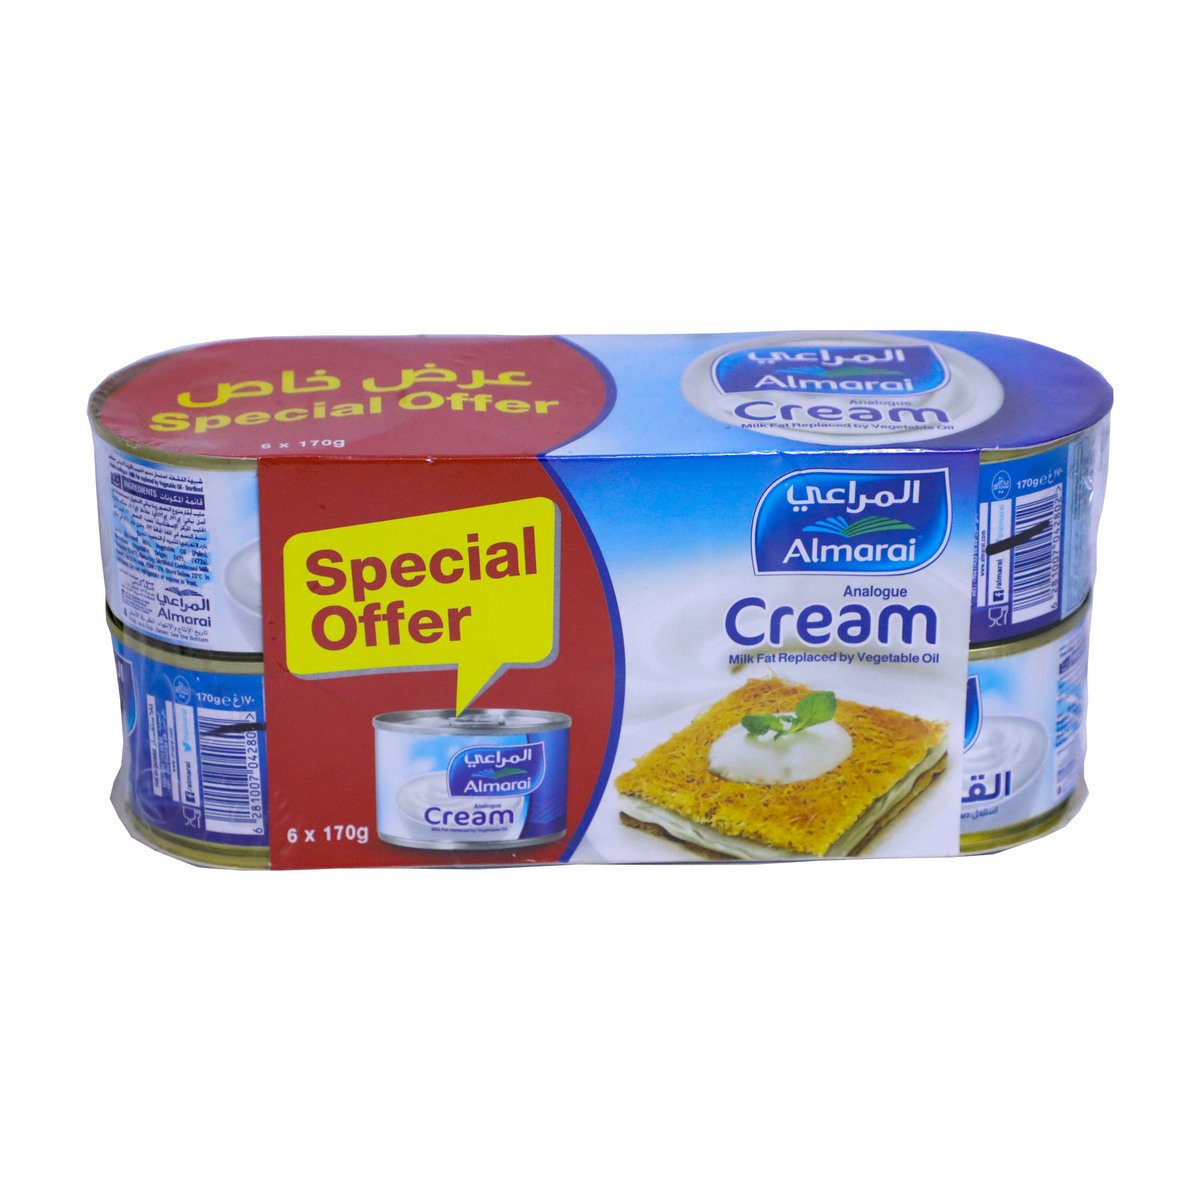 Buy Almarai Analogue Cream Value Pack 6 x 170 g Online at Best Price | Other Dairy Products | Lulu UAE in Saudi Arabia